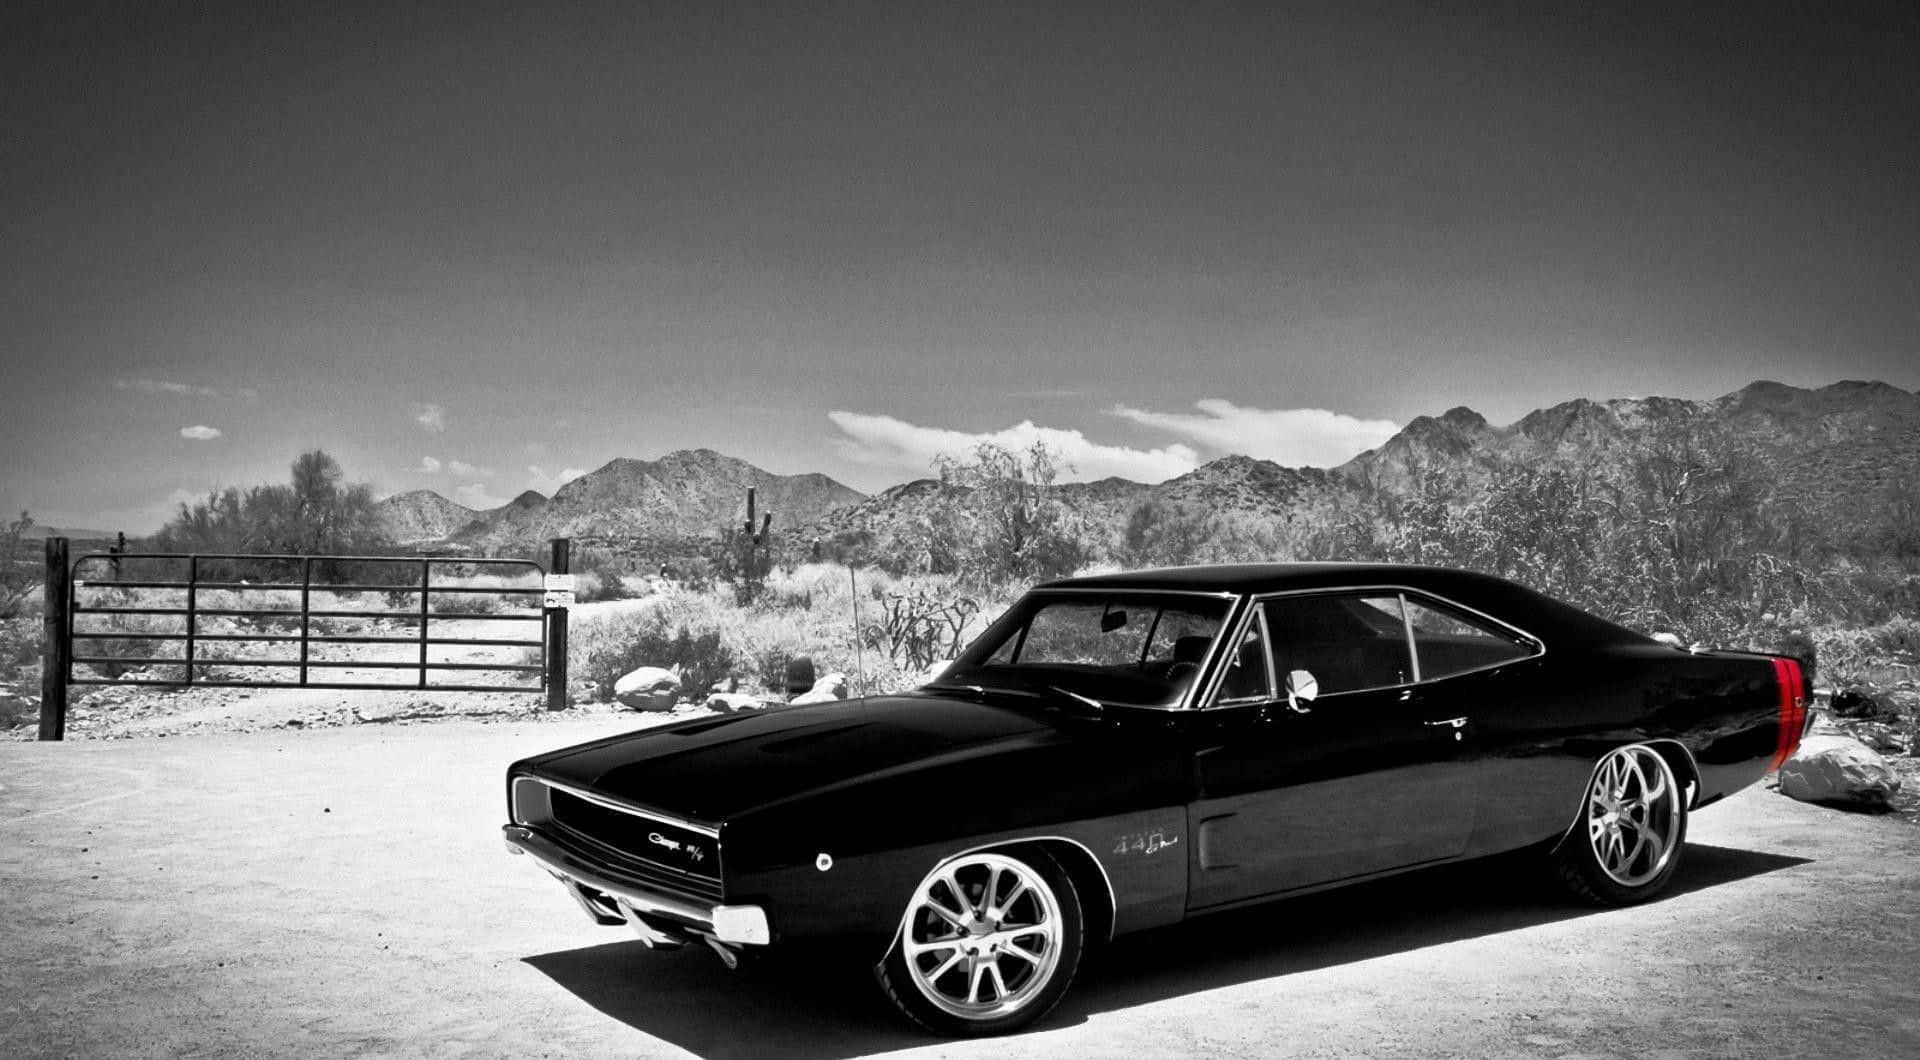 Sleek Black and White Car in High Definition Wallpaper